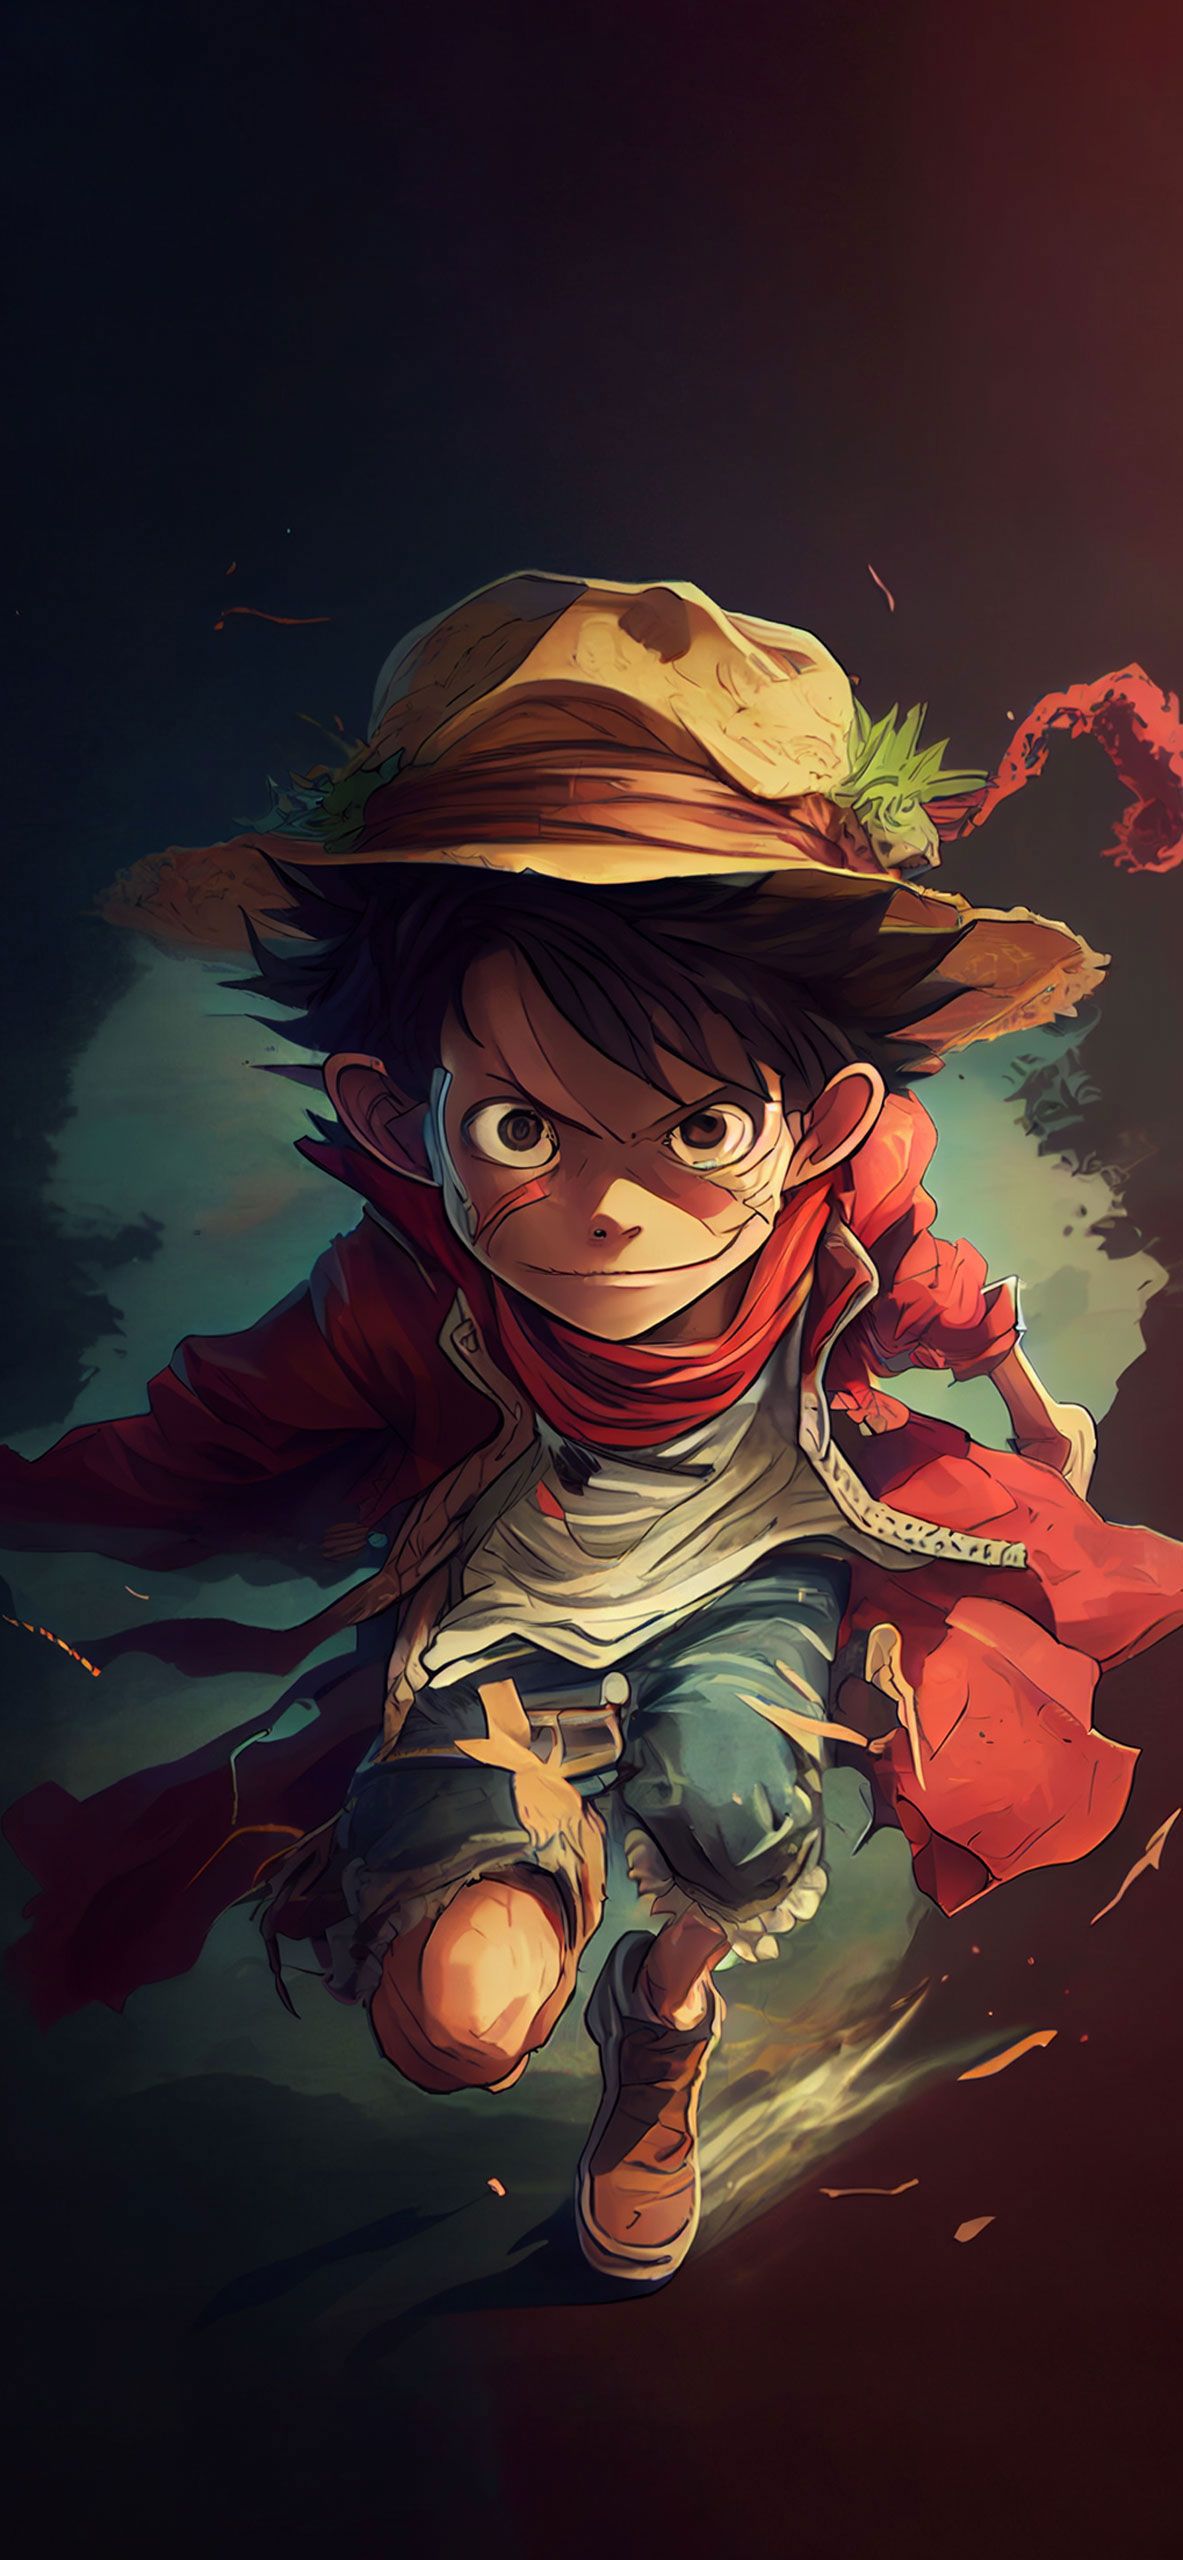 Monkey D. Luffy, one of the most beloved characters in the One Piece series, is ready to take on any challenge that comes his way. - One Piece